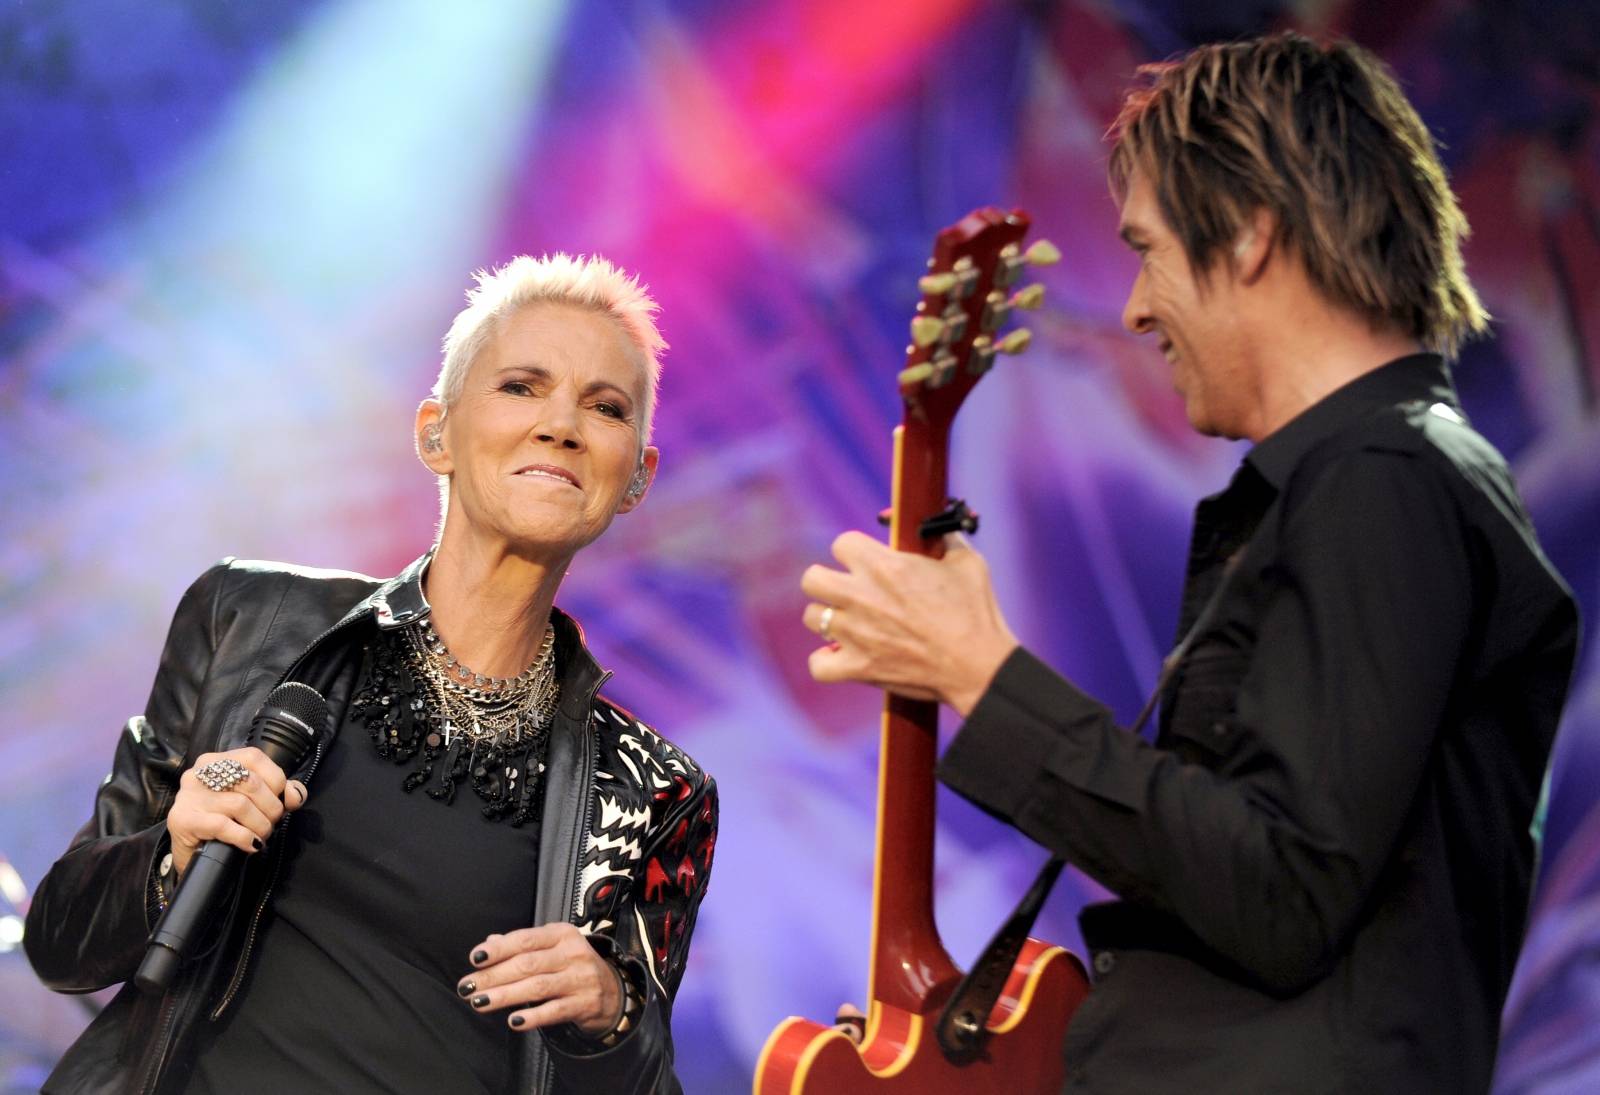 Tour-start of Roxette in Germany